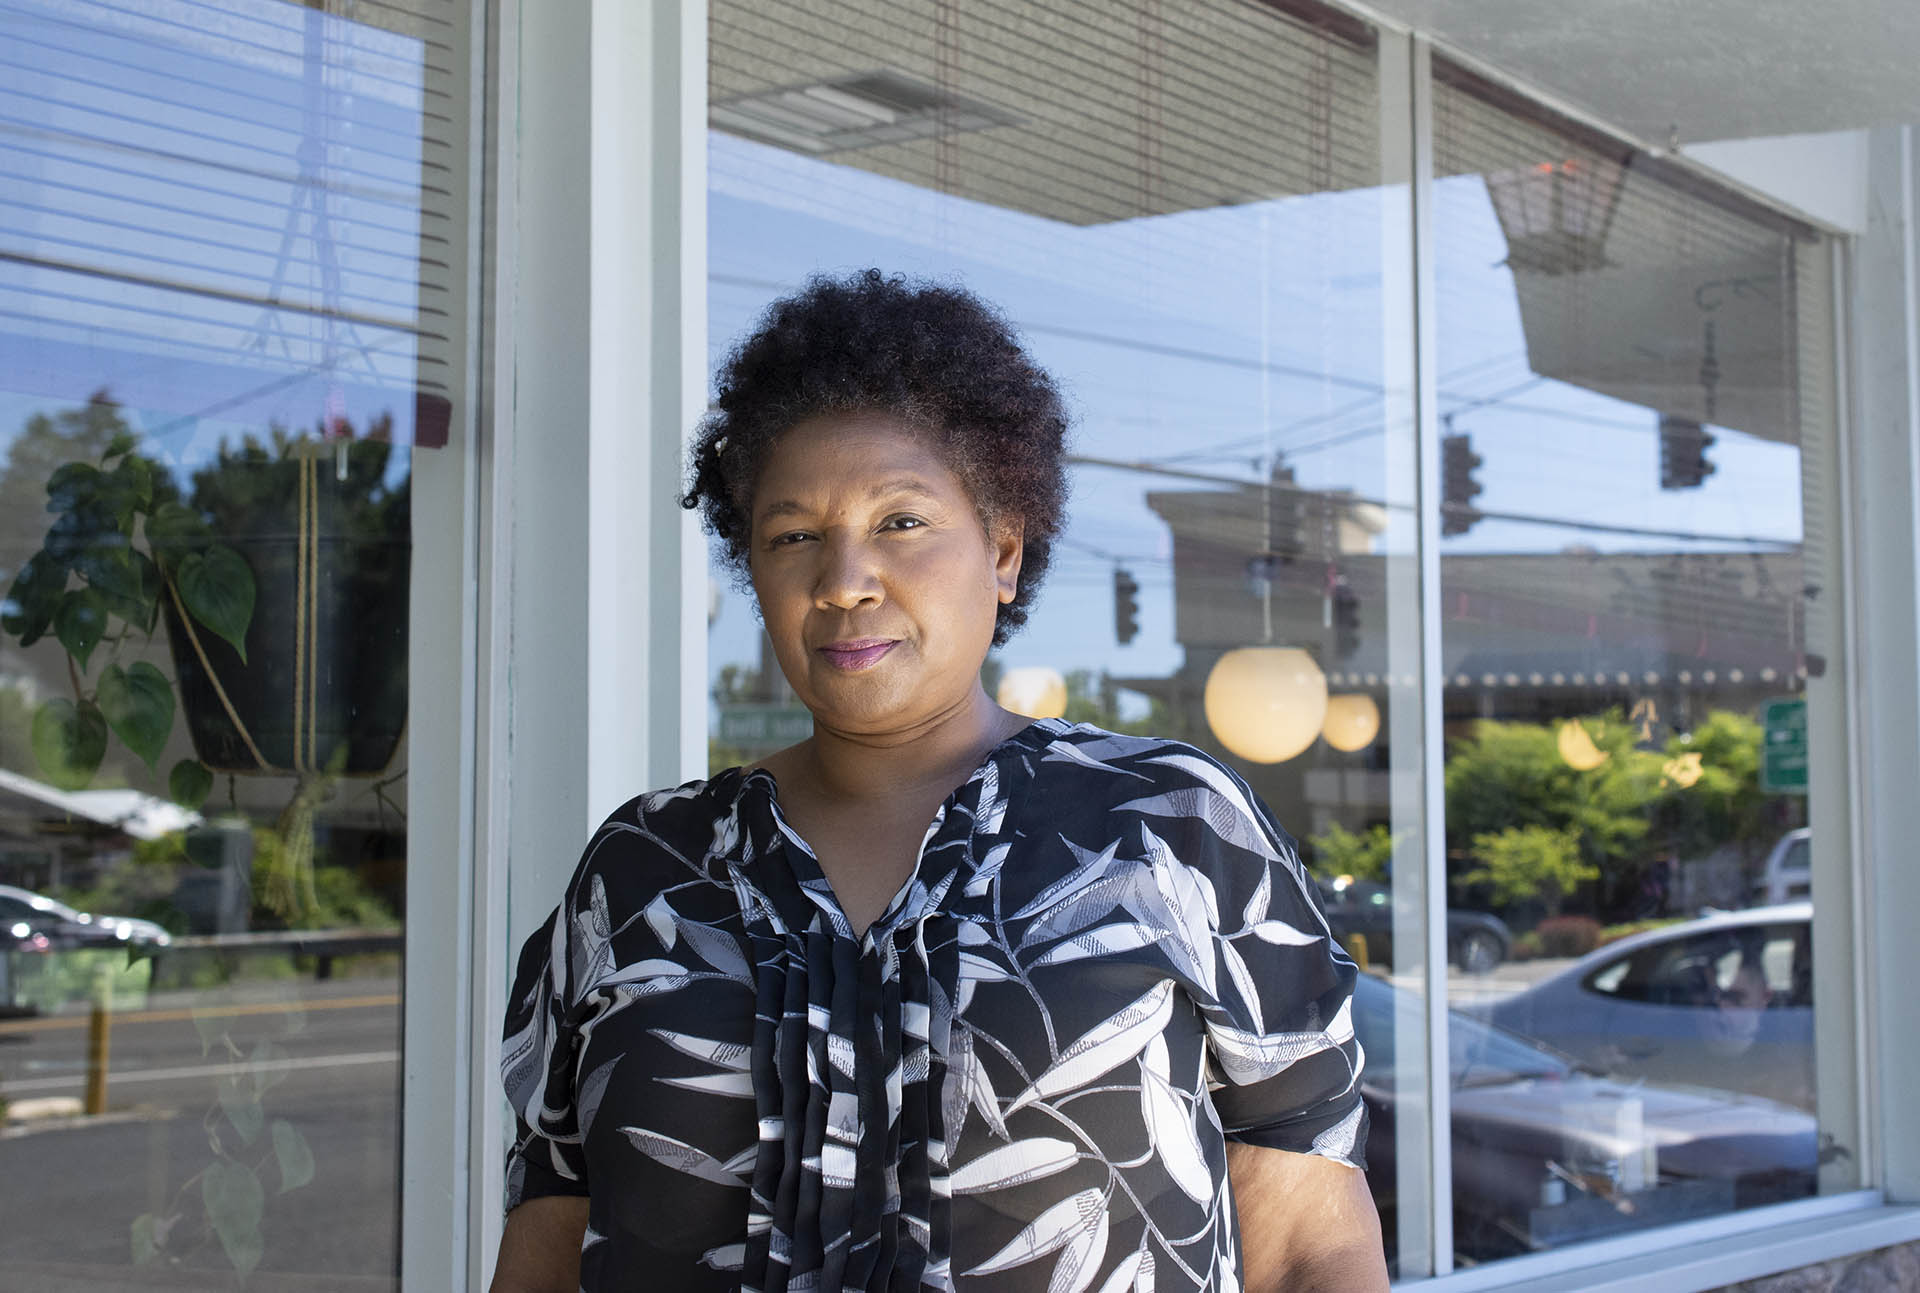 A Black female farmer stands in front of a diner window.